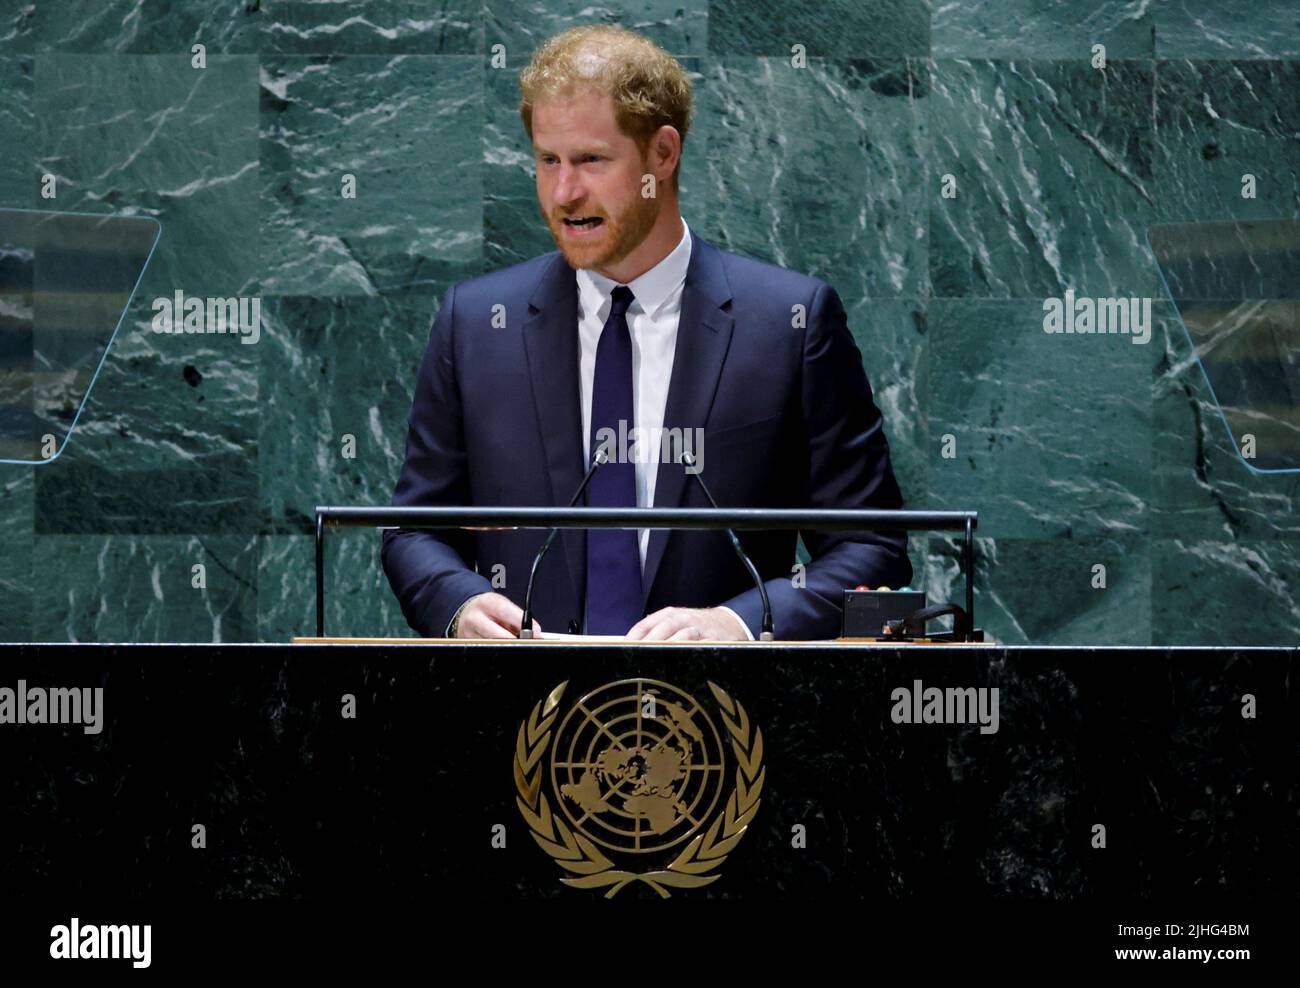 Britain's Prince Harry addresses the United Nations General Assembly at the celebration of Nelson Mandela International Day at the United Nations Headquarters in New York, U.S., July 18, 2022. REUTERS/Eduardo Munoz Stock Photo